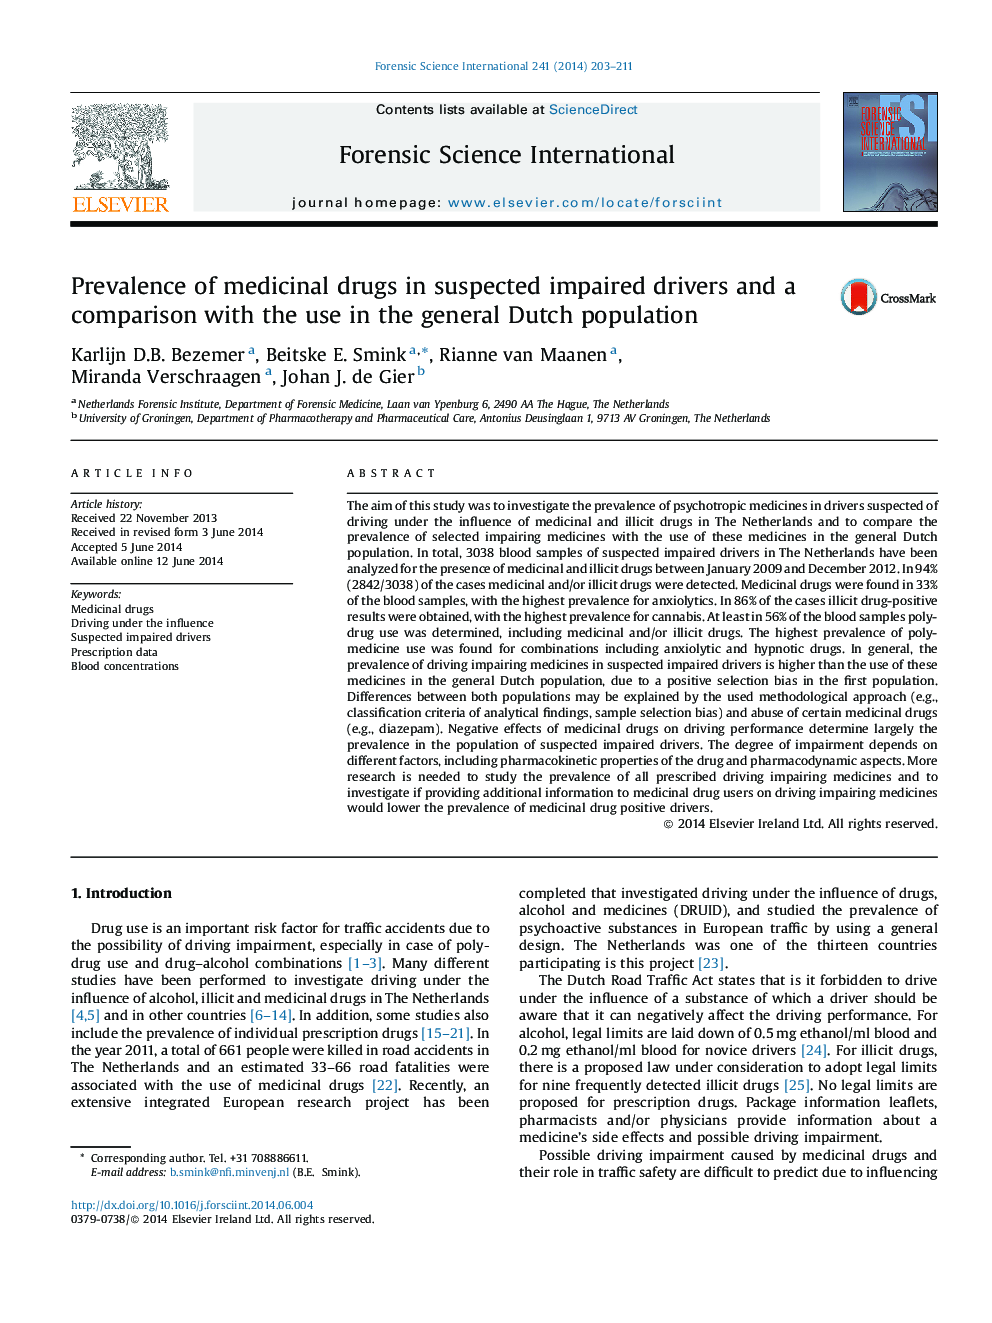 Prevalence of medicinal drugs in suspected impaired drivers and a comparison with the use in the general Dutch population